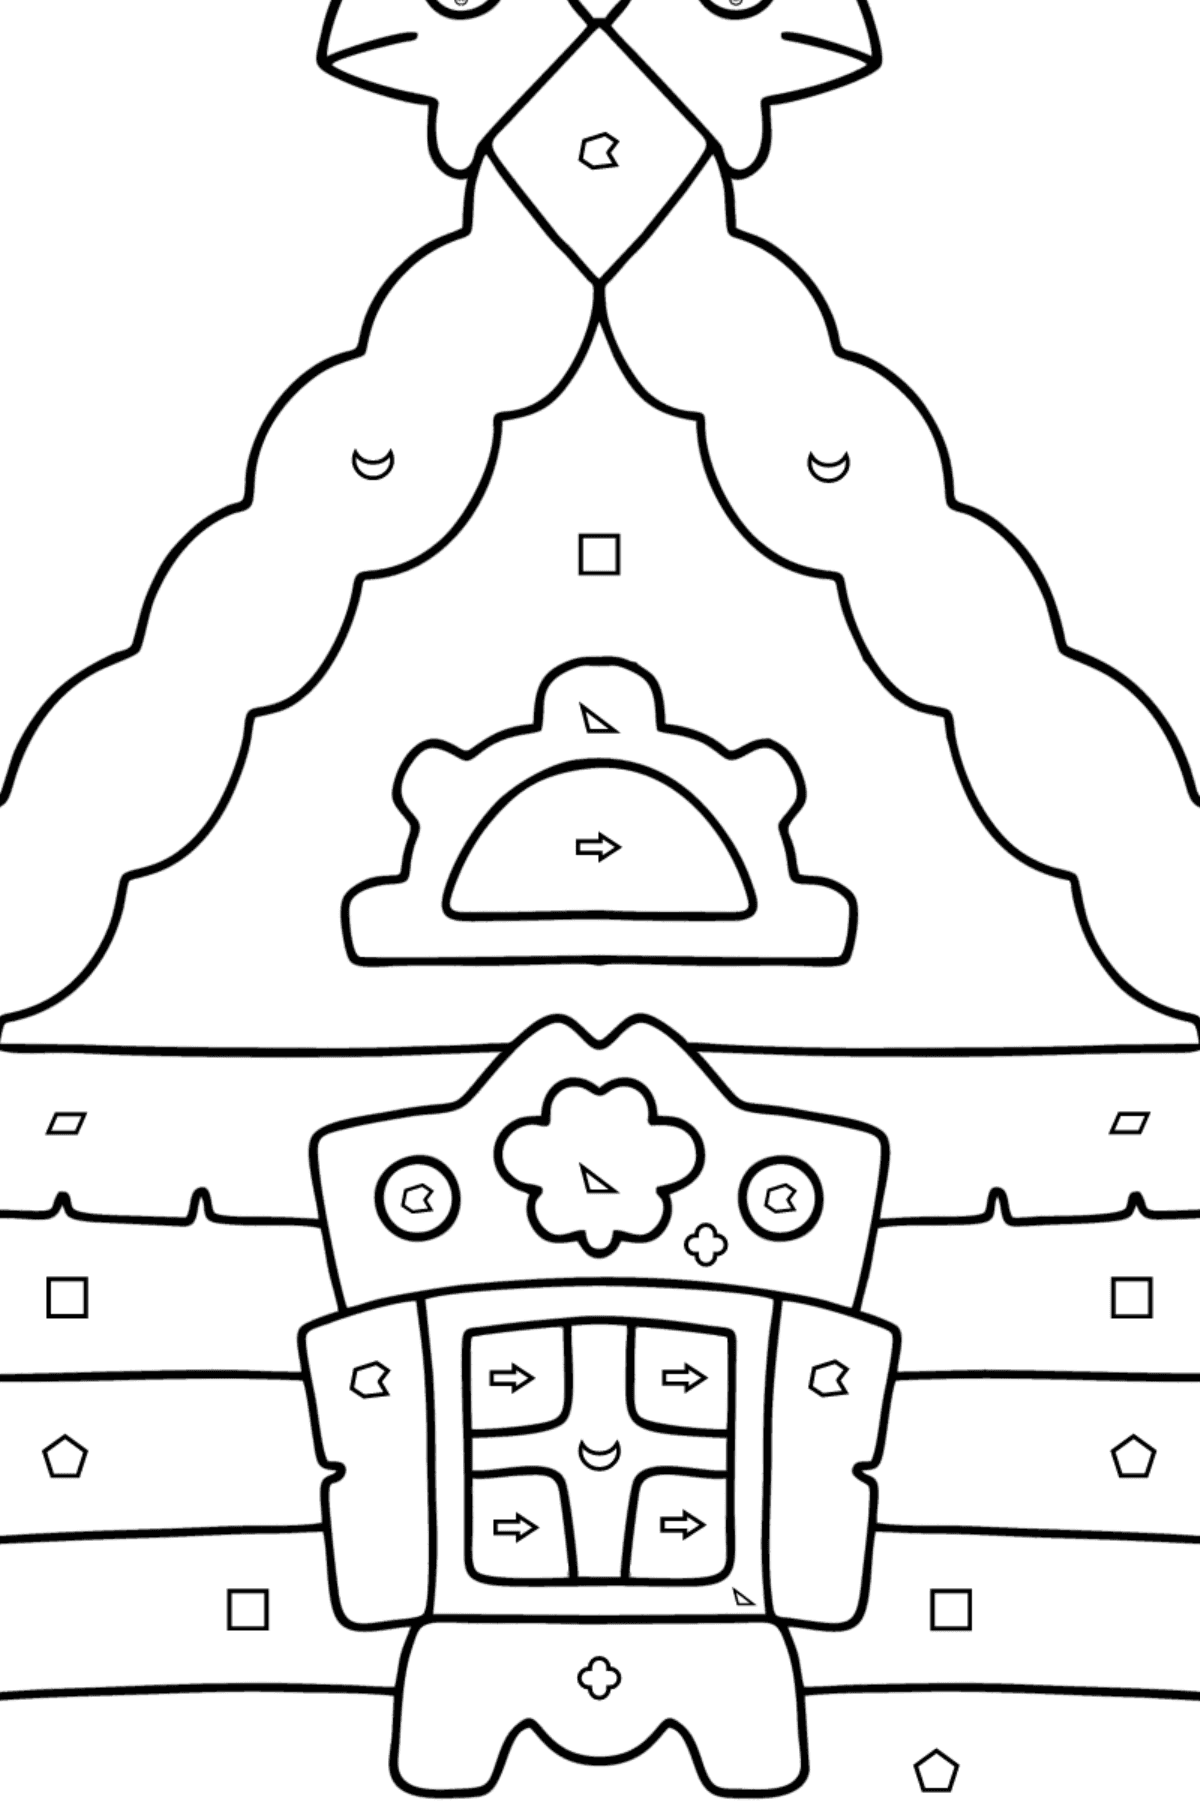 Log Cabin coloring page - Coloring by Geometric Shapes for Kids